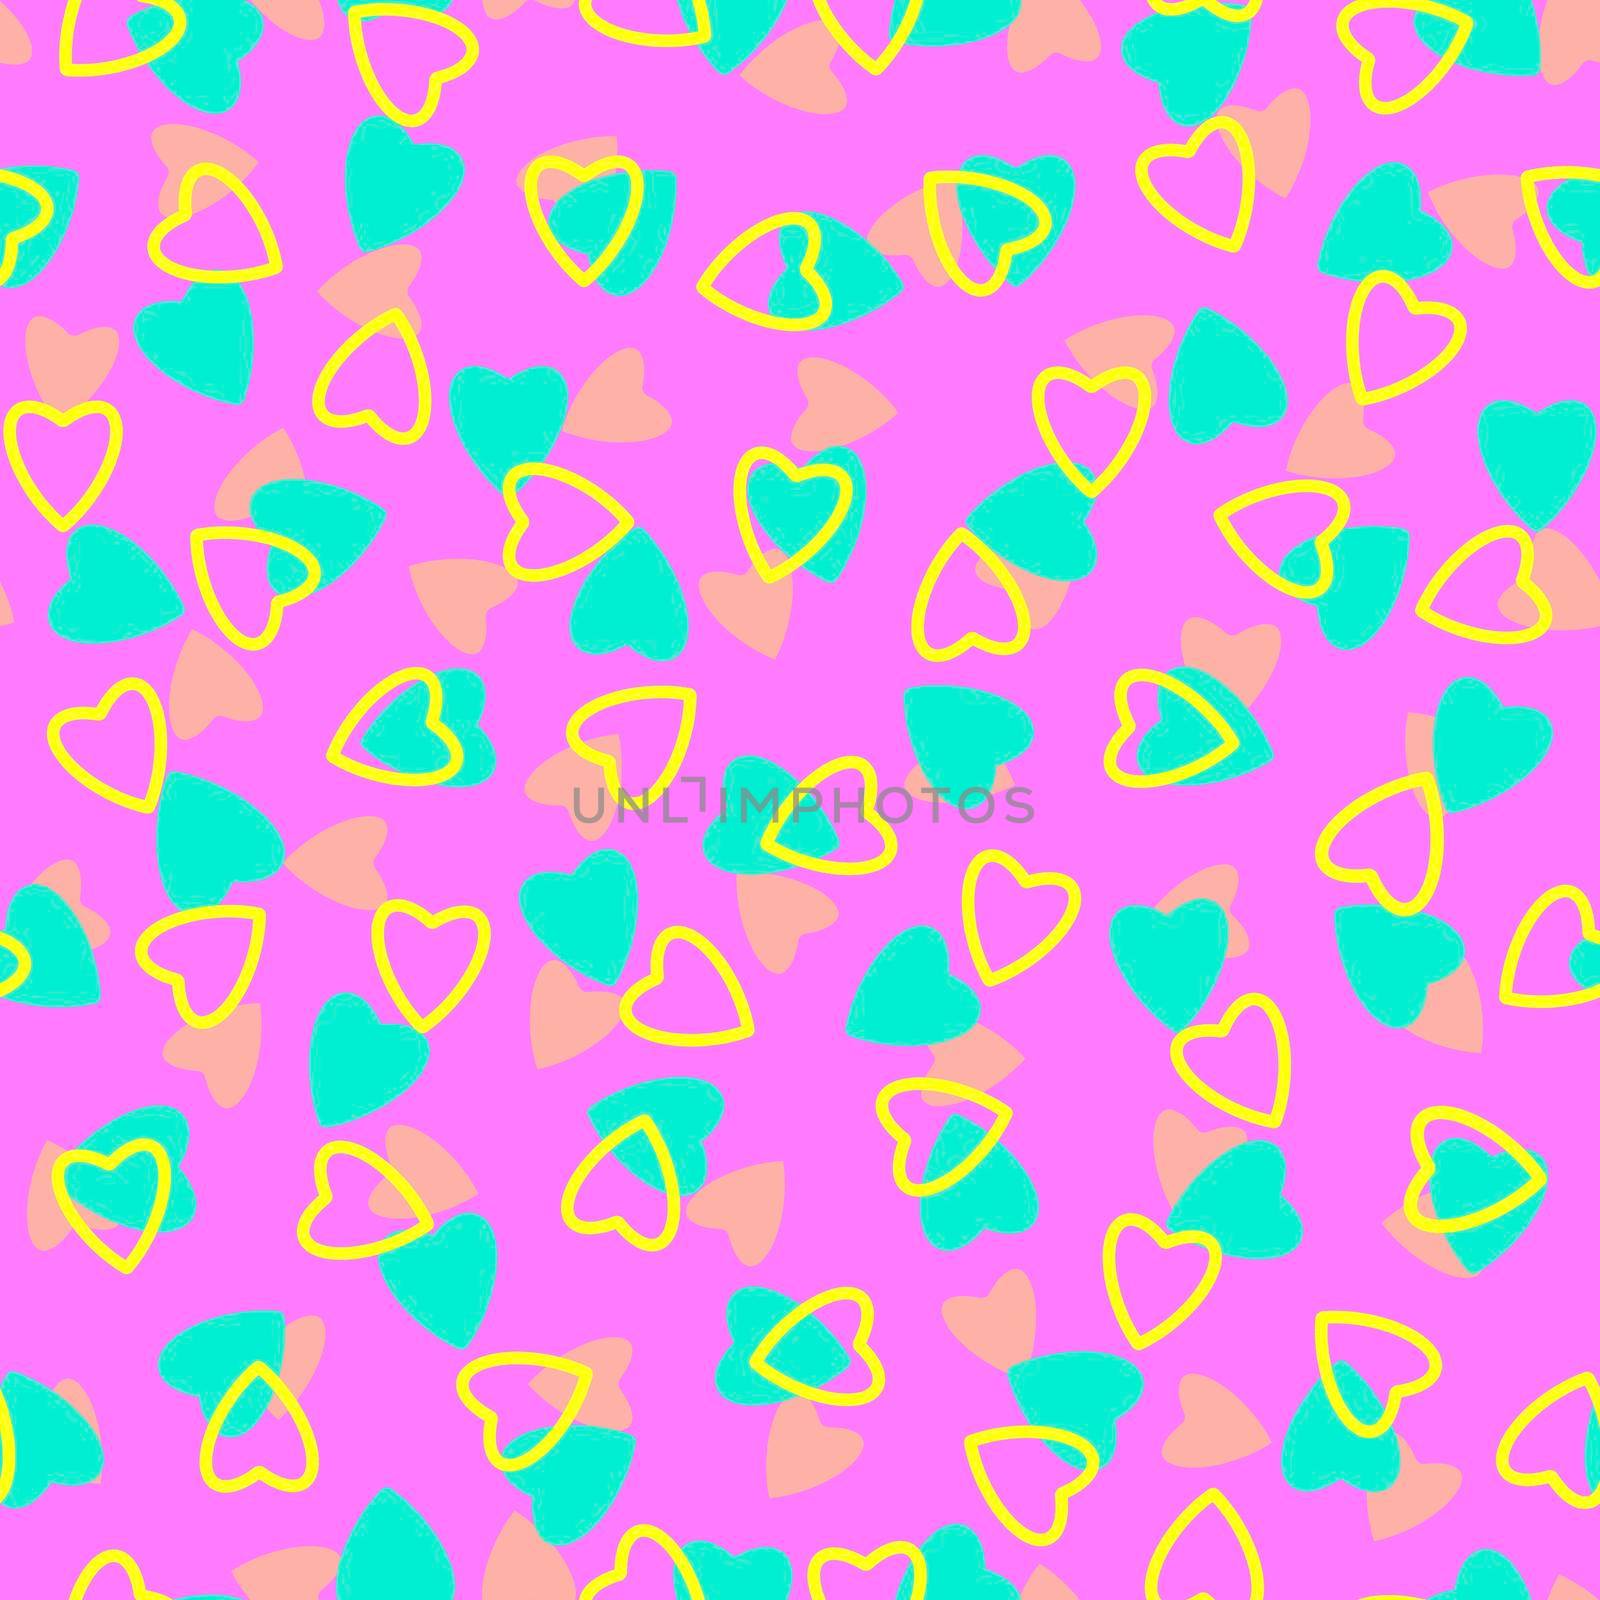 Simple heart seamless pattern,endless chaotic texture made of tiny heart silhouettes.Valentines,mothers day background.Yellow,azure,pink.Great for Easter,wedding,scrapbook,gift wrapping paper,textiles